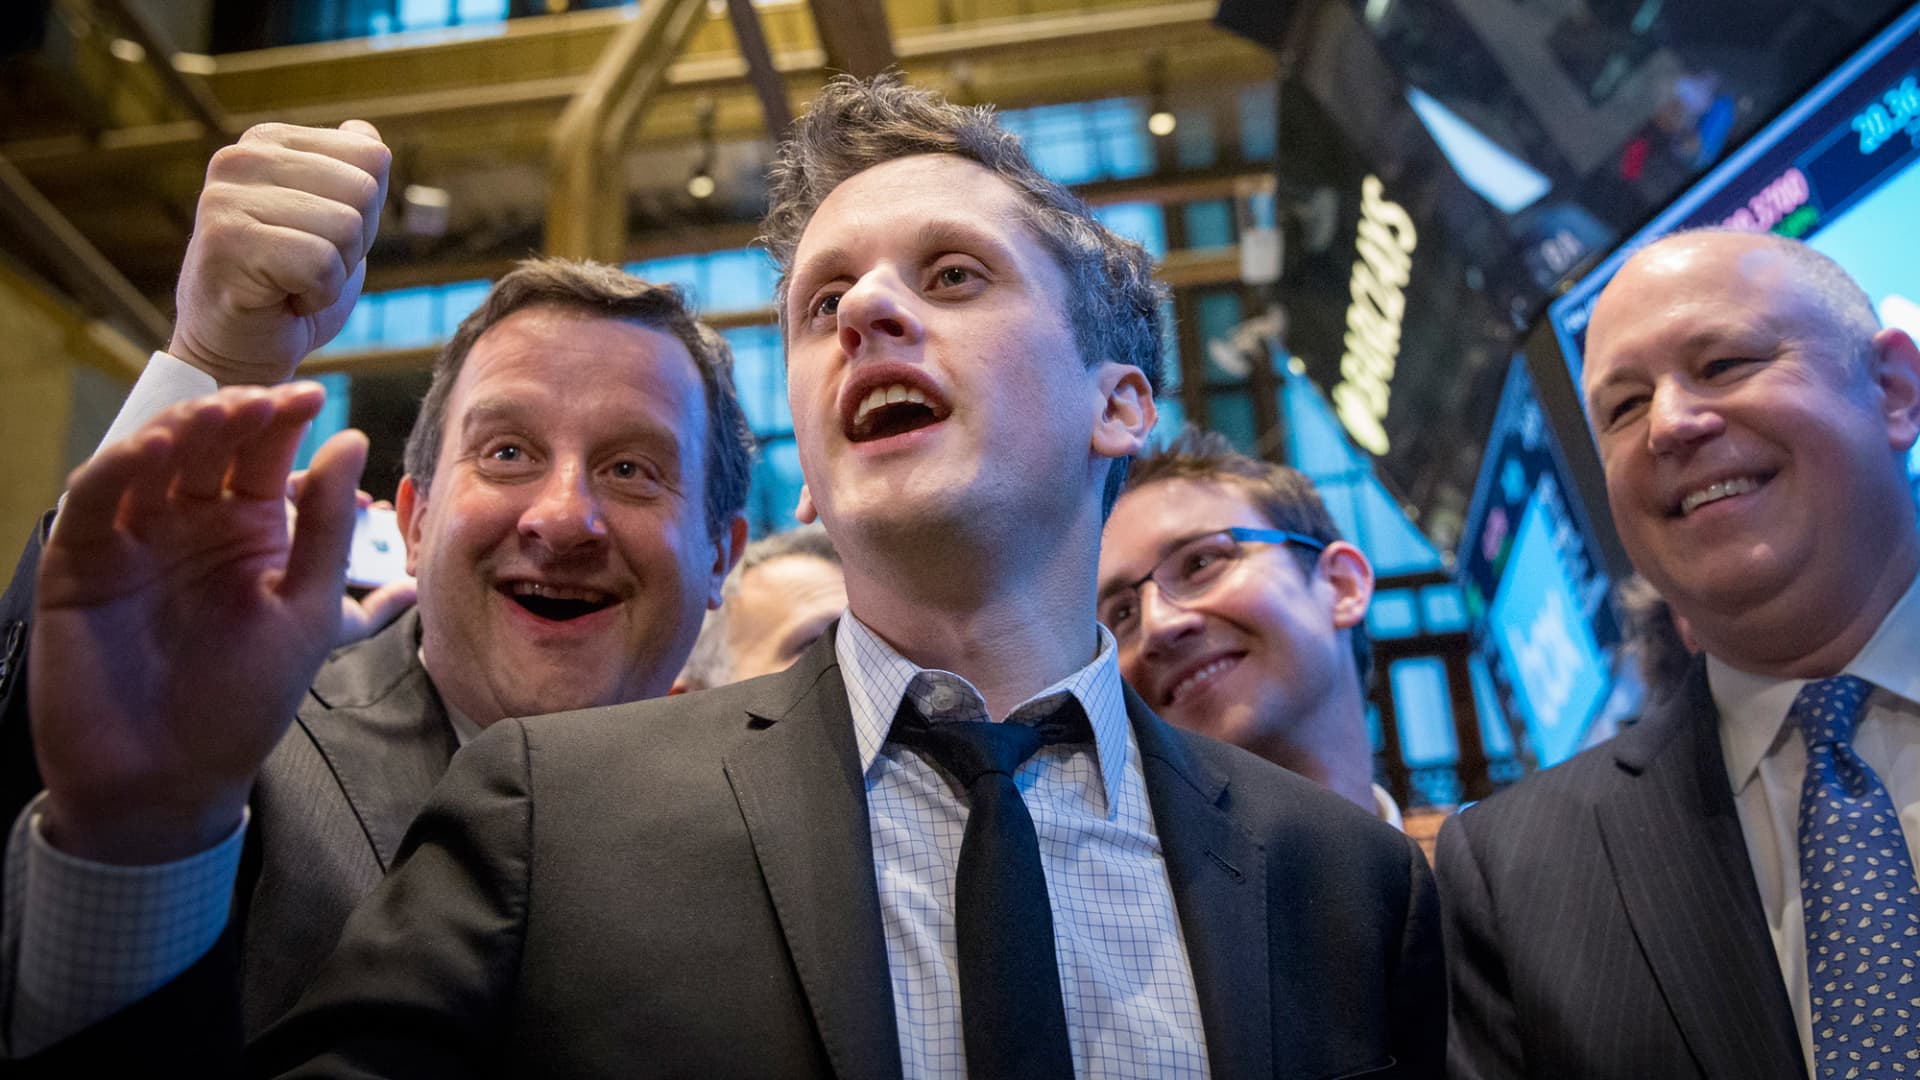 Box co-counders Aaron Levie (C) and Dylan Smith (2nd R) celebrate their company's IPO on the floor of the New York Stock Exchange, Jan. 23, 2015.